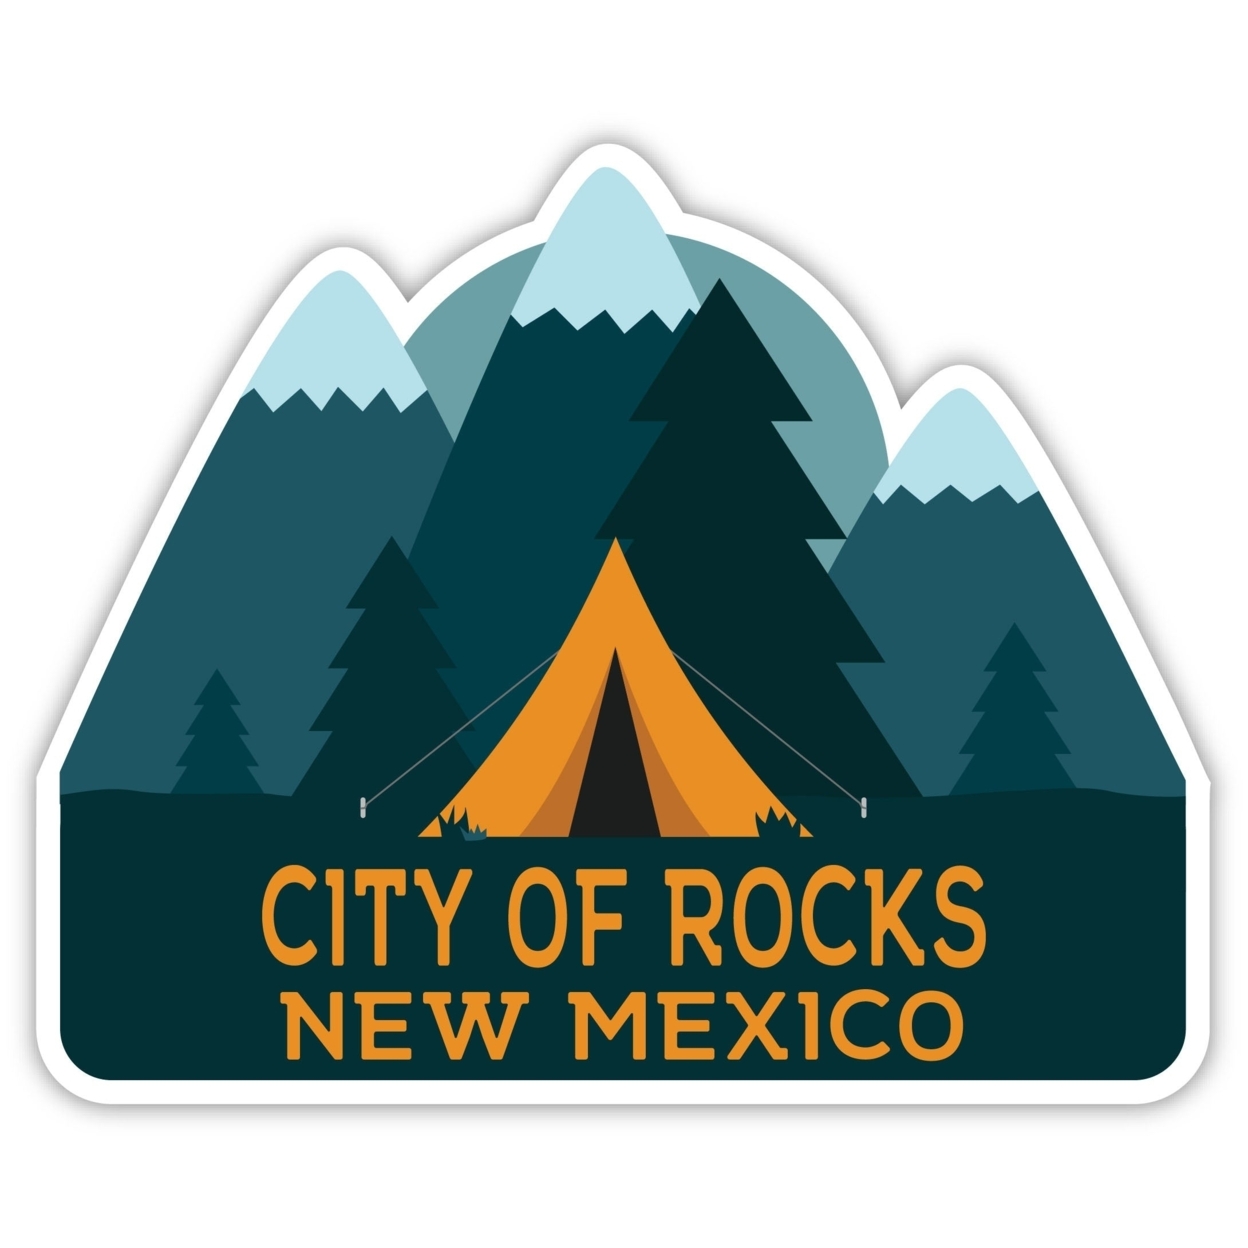 City Of Rocks New Mexico Souvenir Decorative Stickers (Choose Theme And Size) - 4-Pack, 2-Inch, Tent